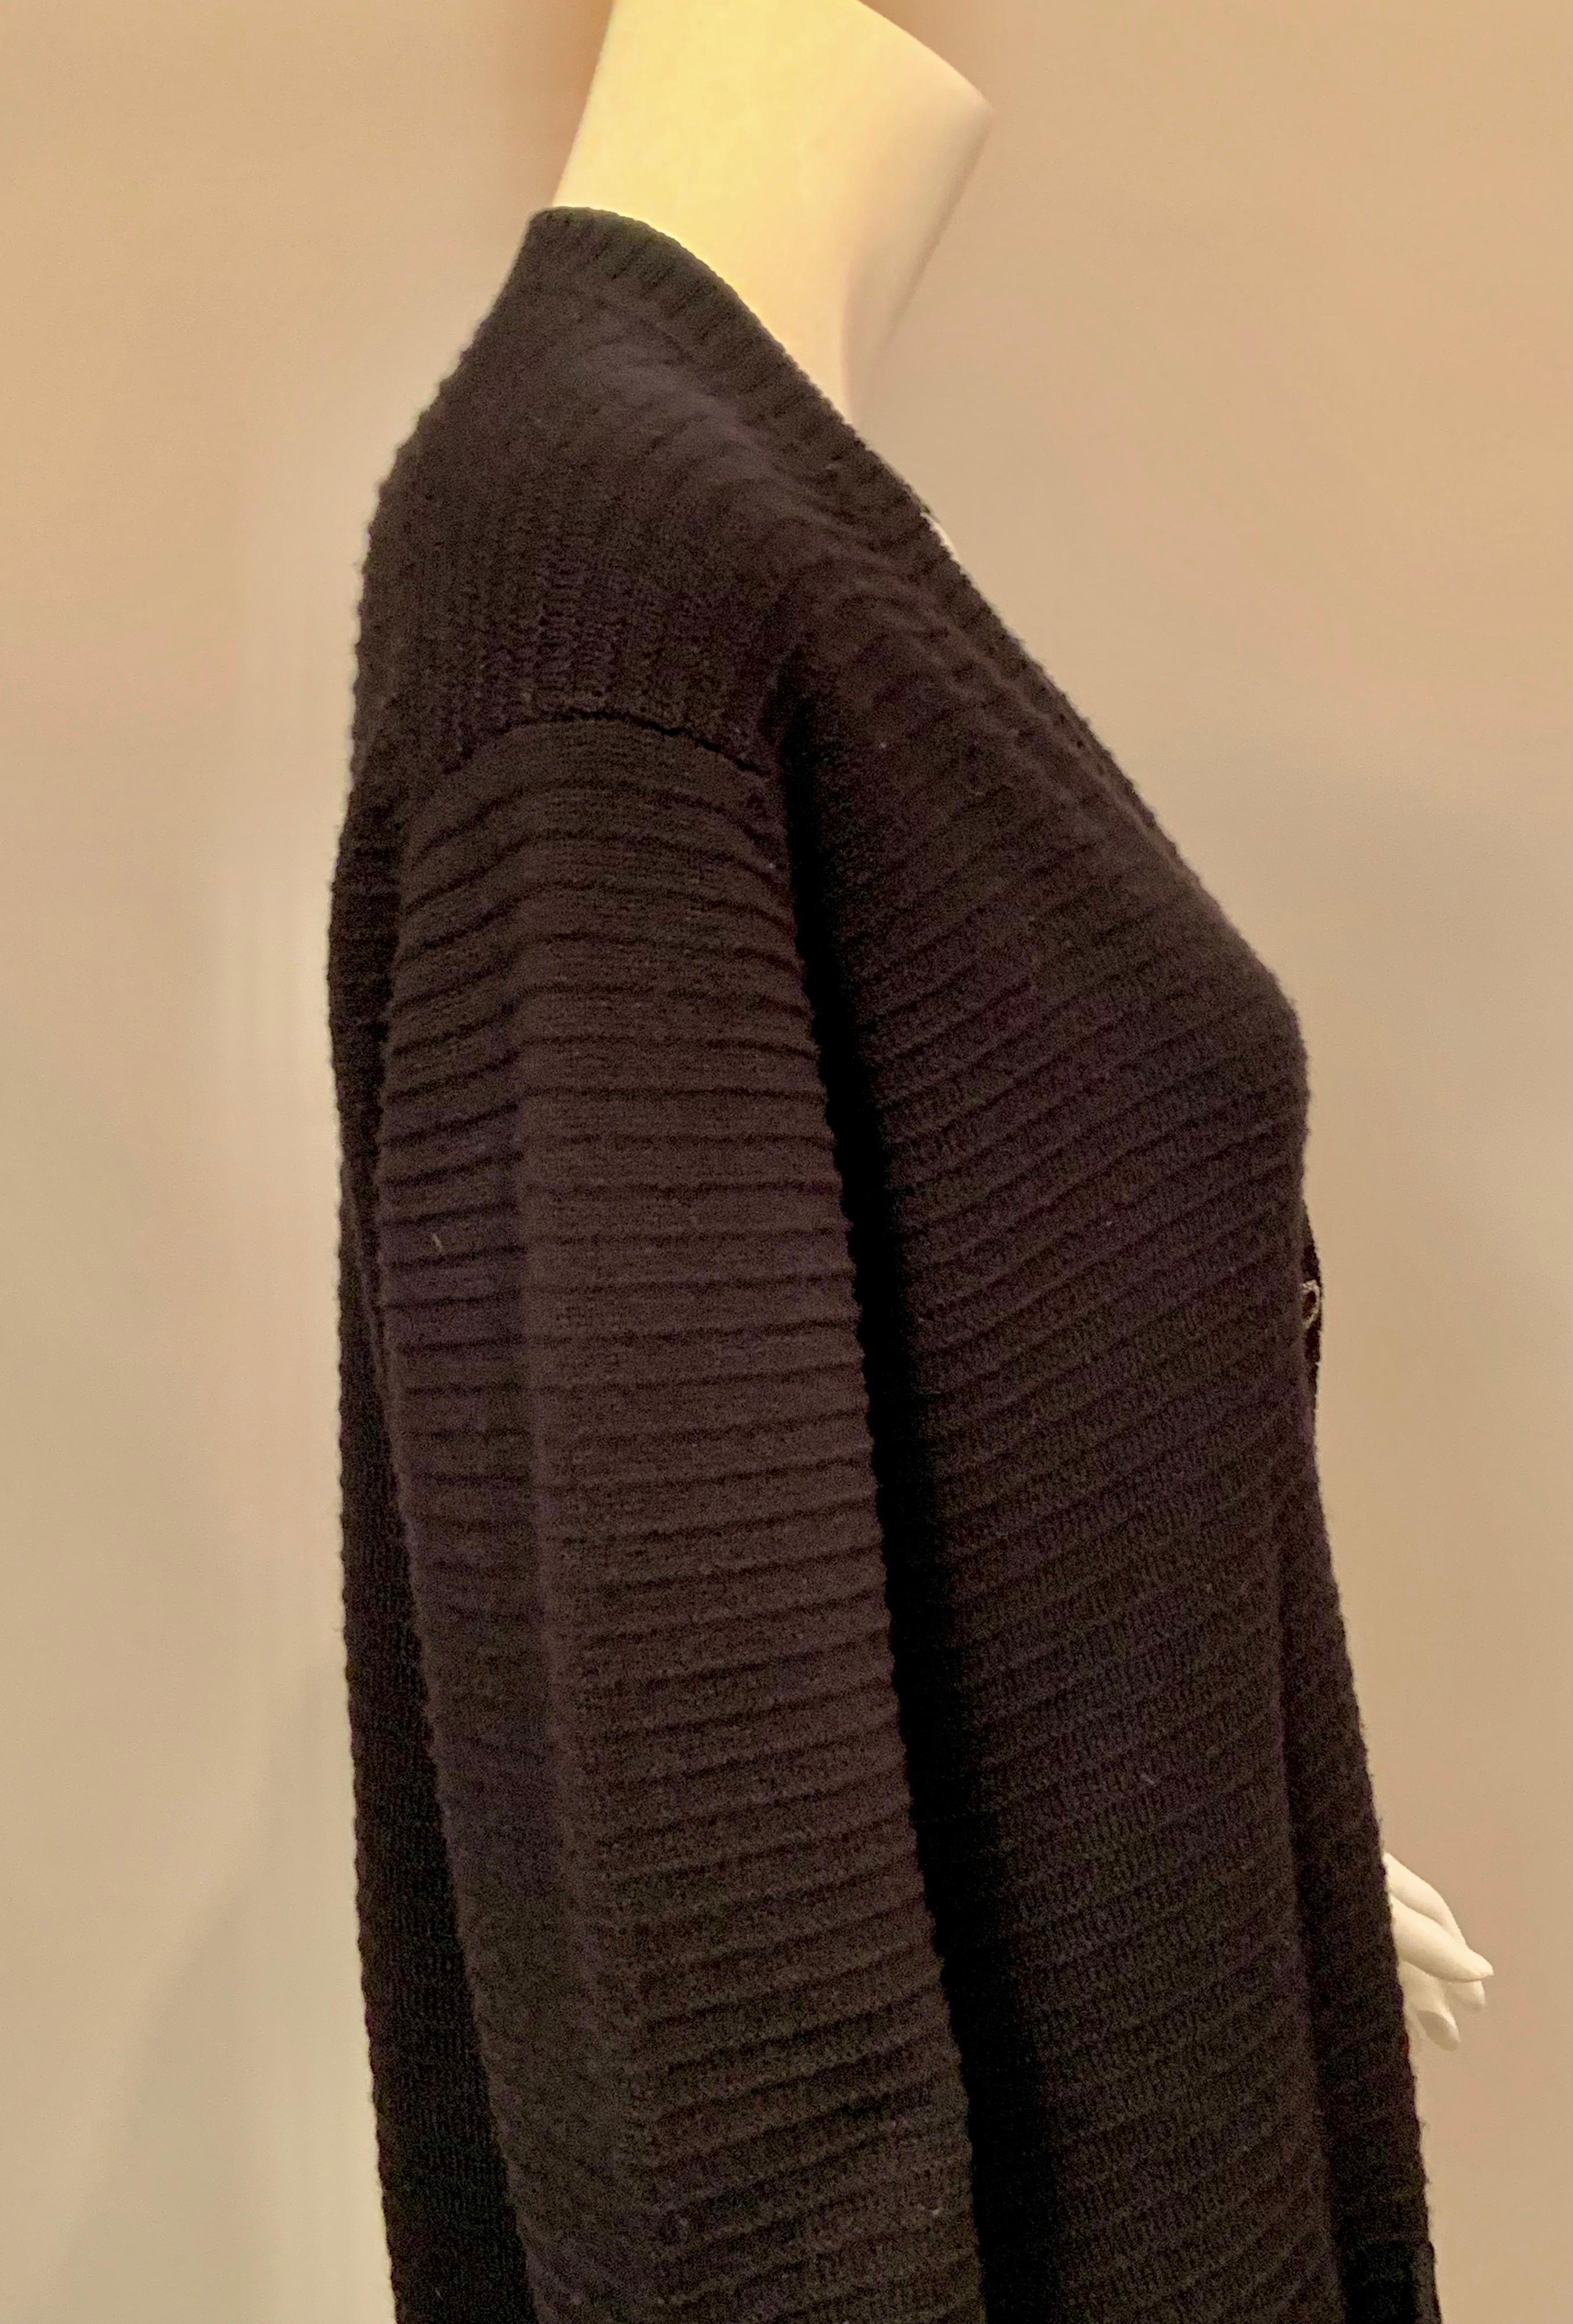 Chanel Black Cashmere Long Cardigan Sweater, Larger Size 3